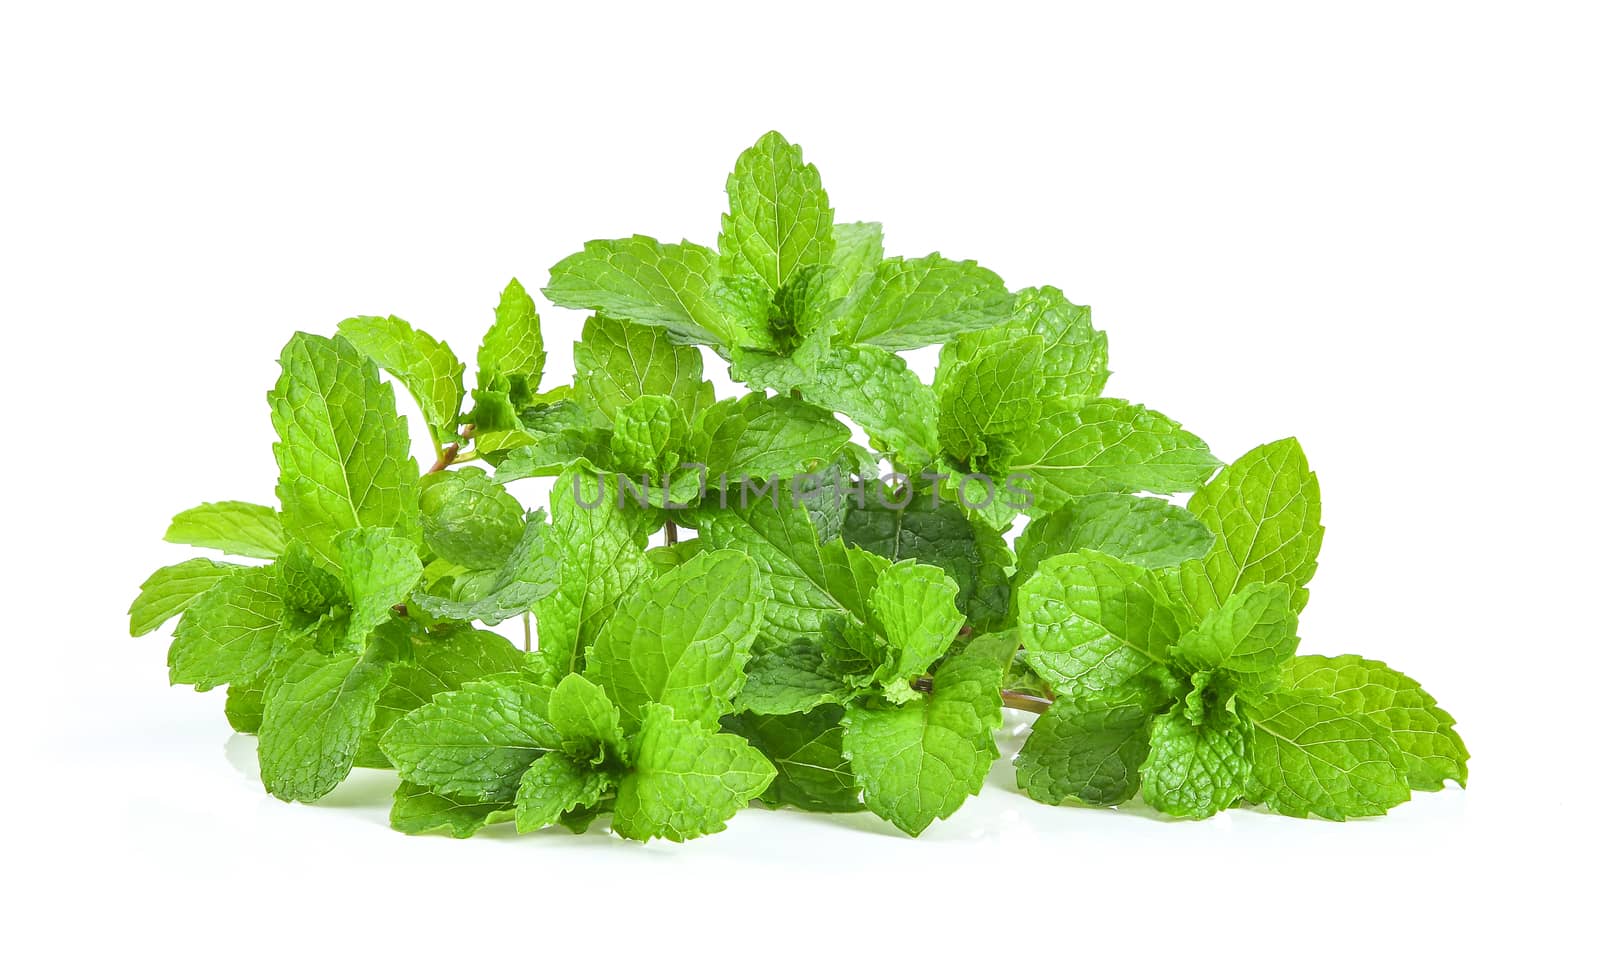 mint leafs isolated on white background by sommai